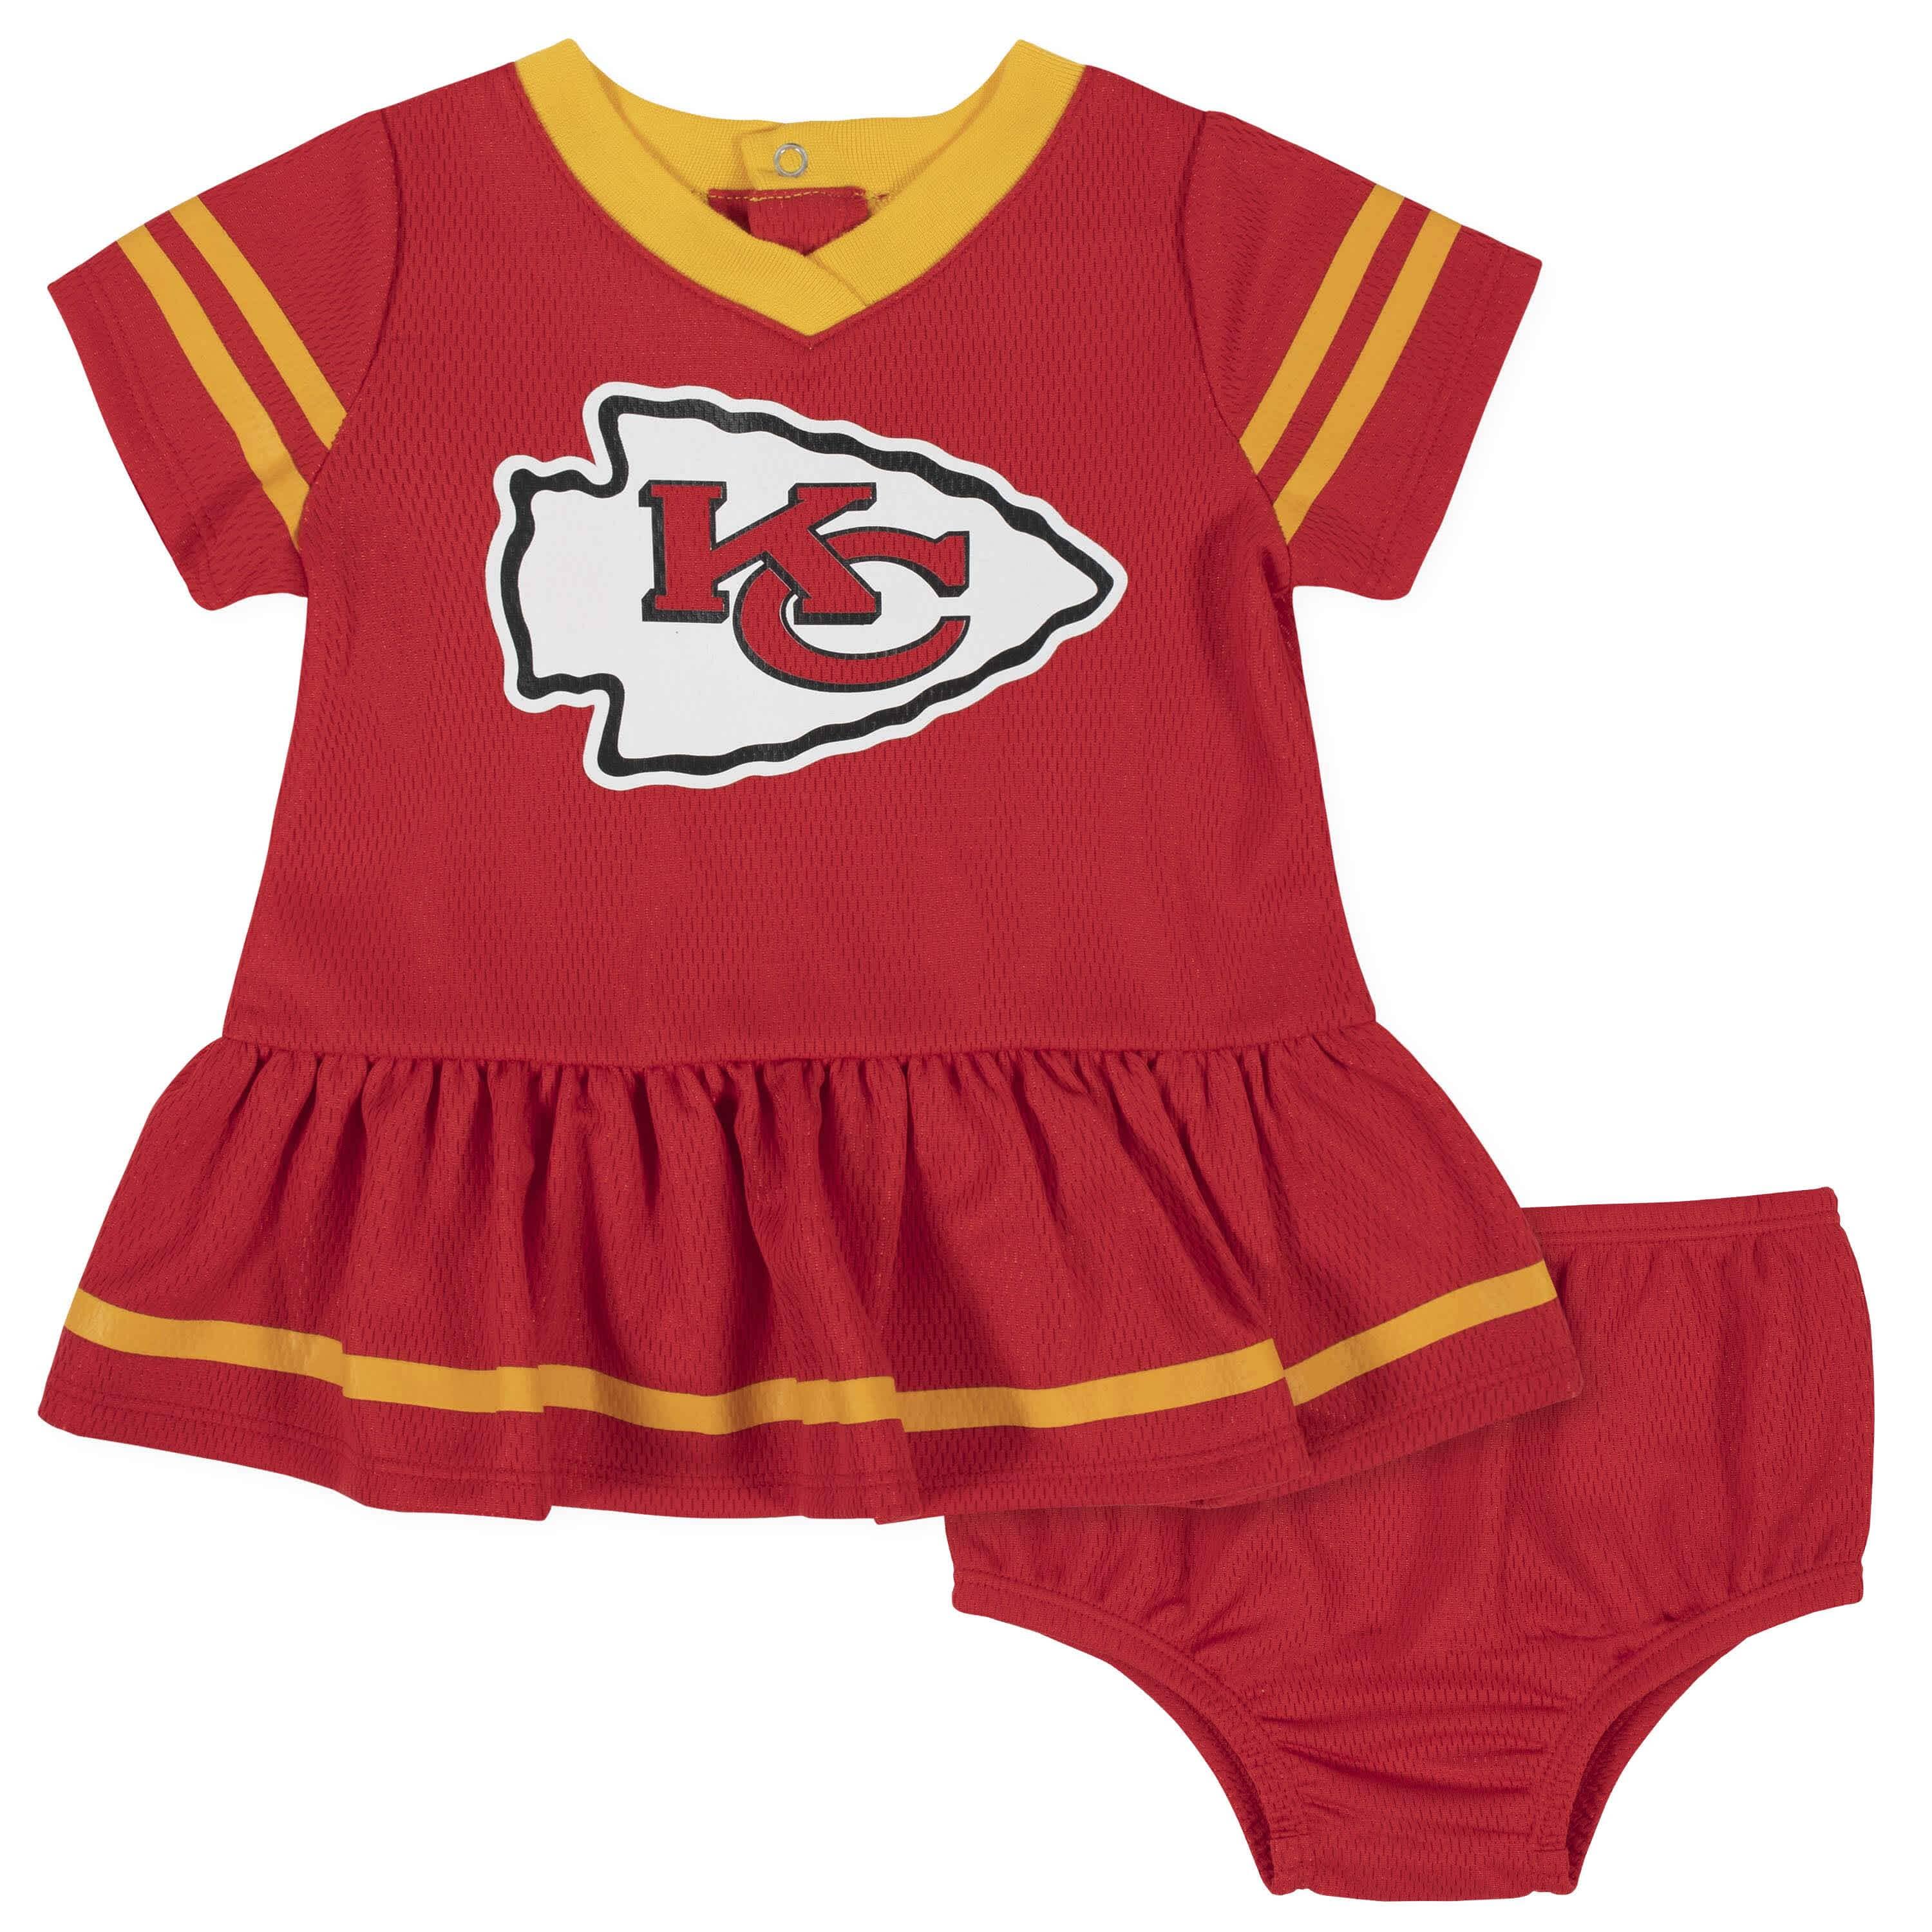 Girls St. Louis Cardinals Outfit, Cardinals Baby Shower Gift, Baby